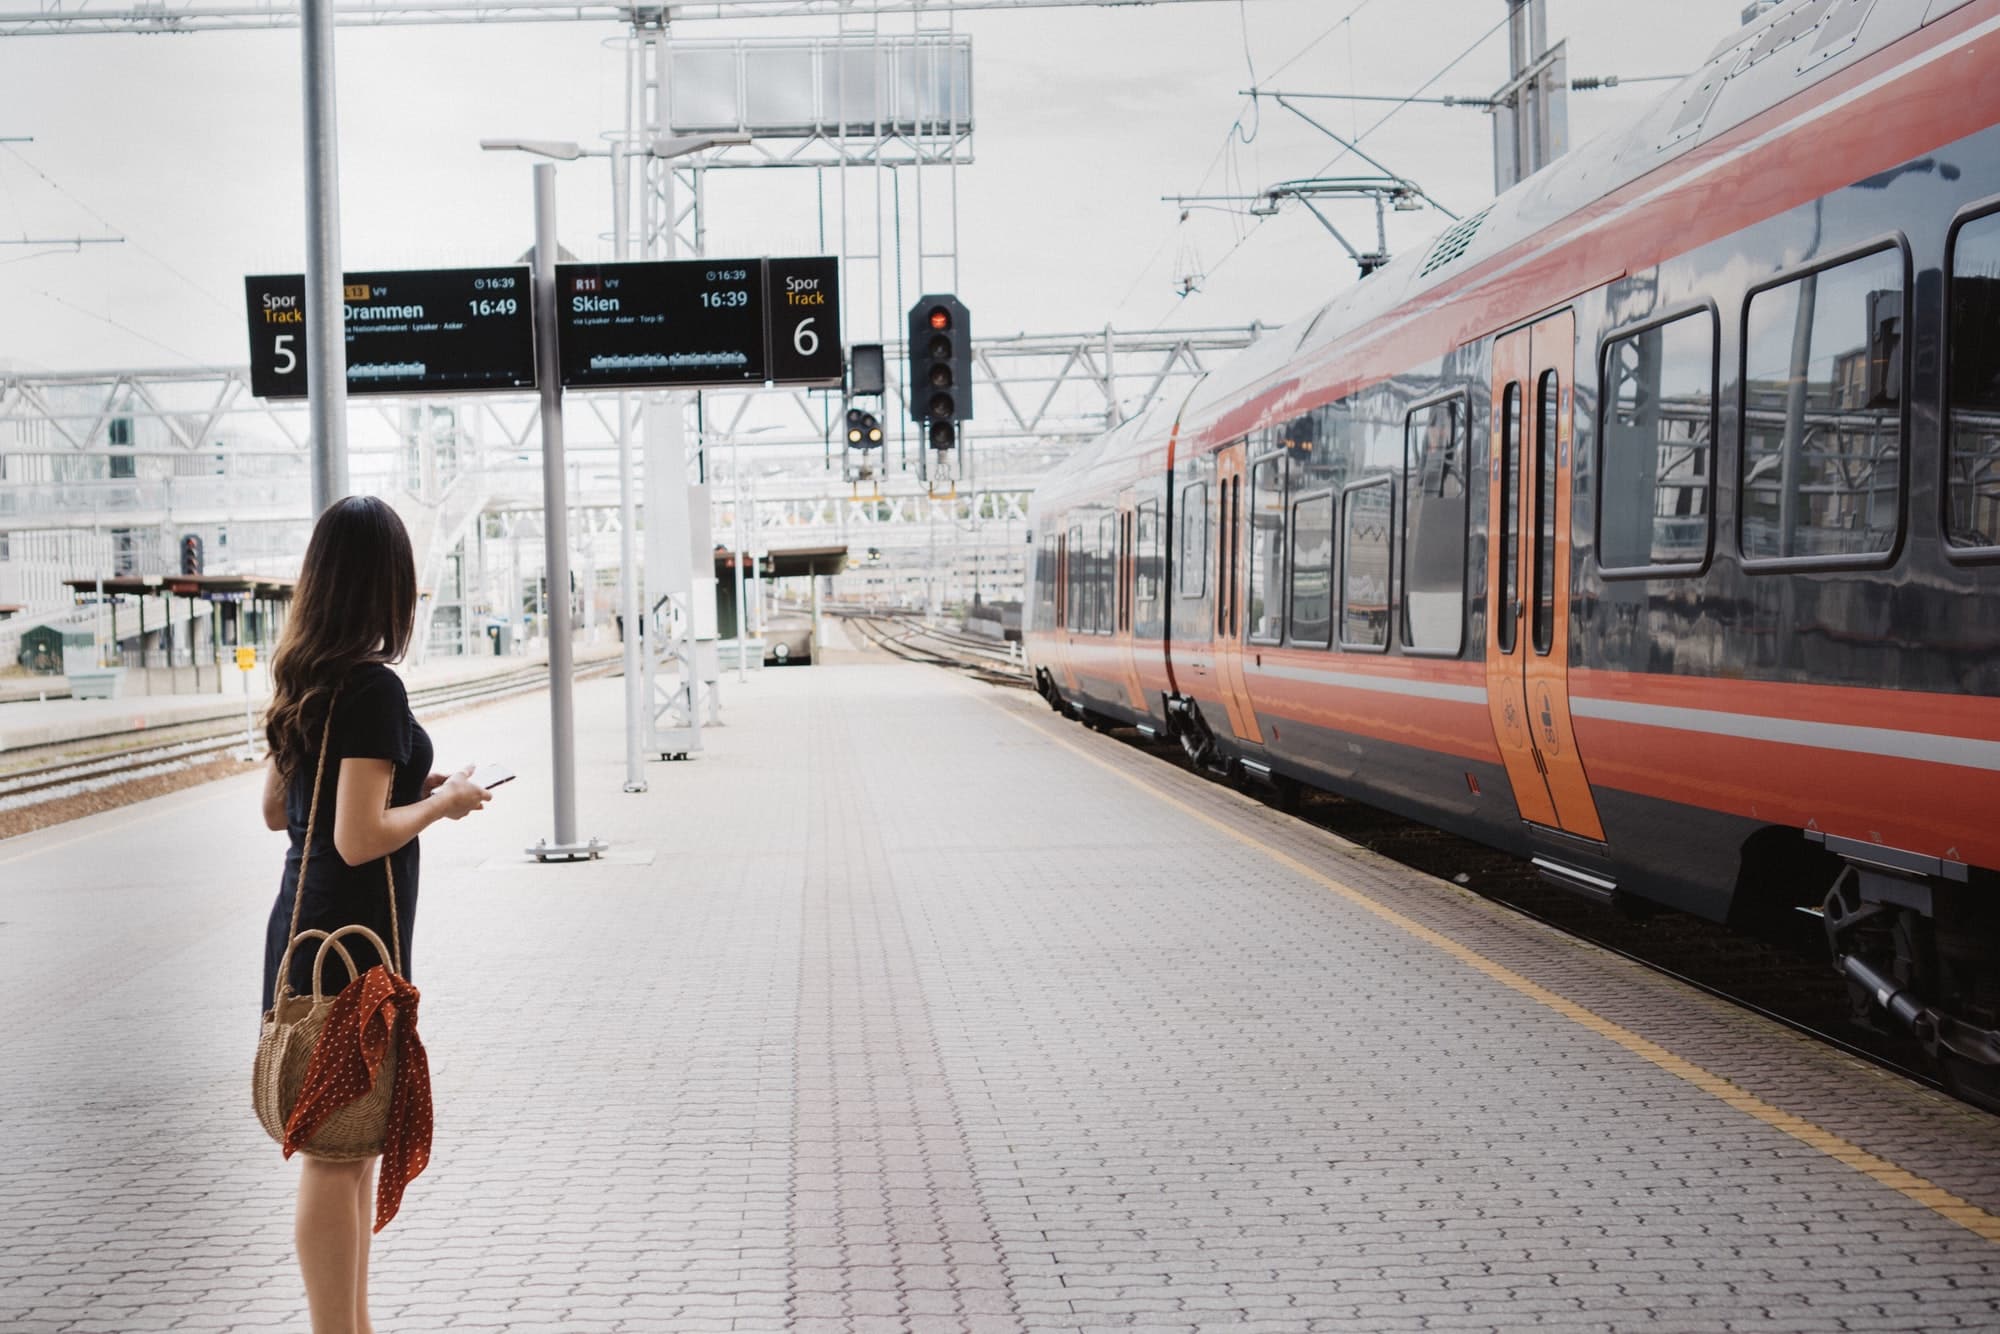 woman waiting at train station platform for train to arrive